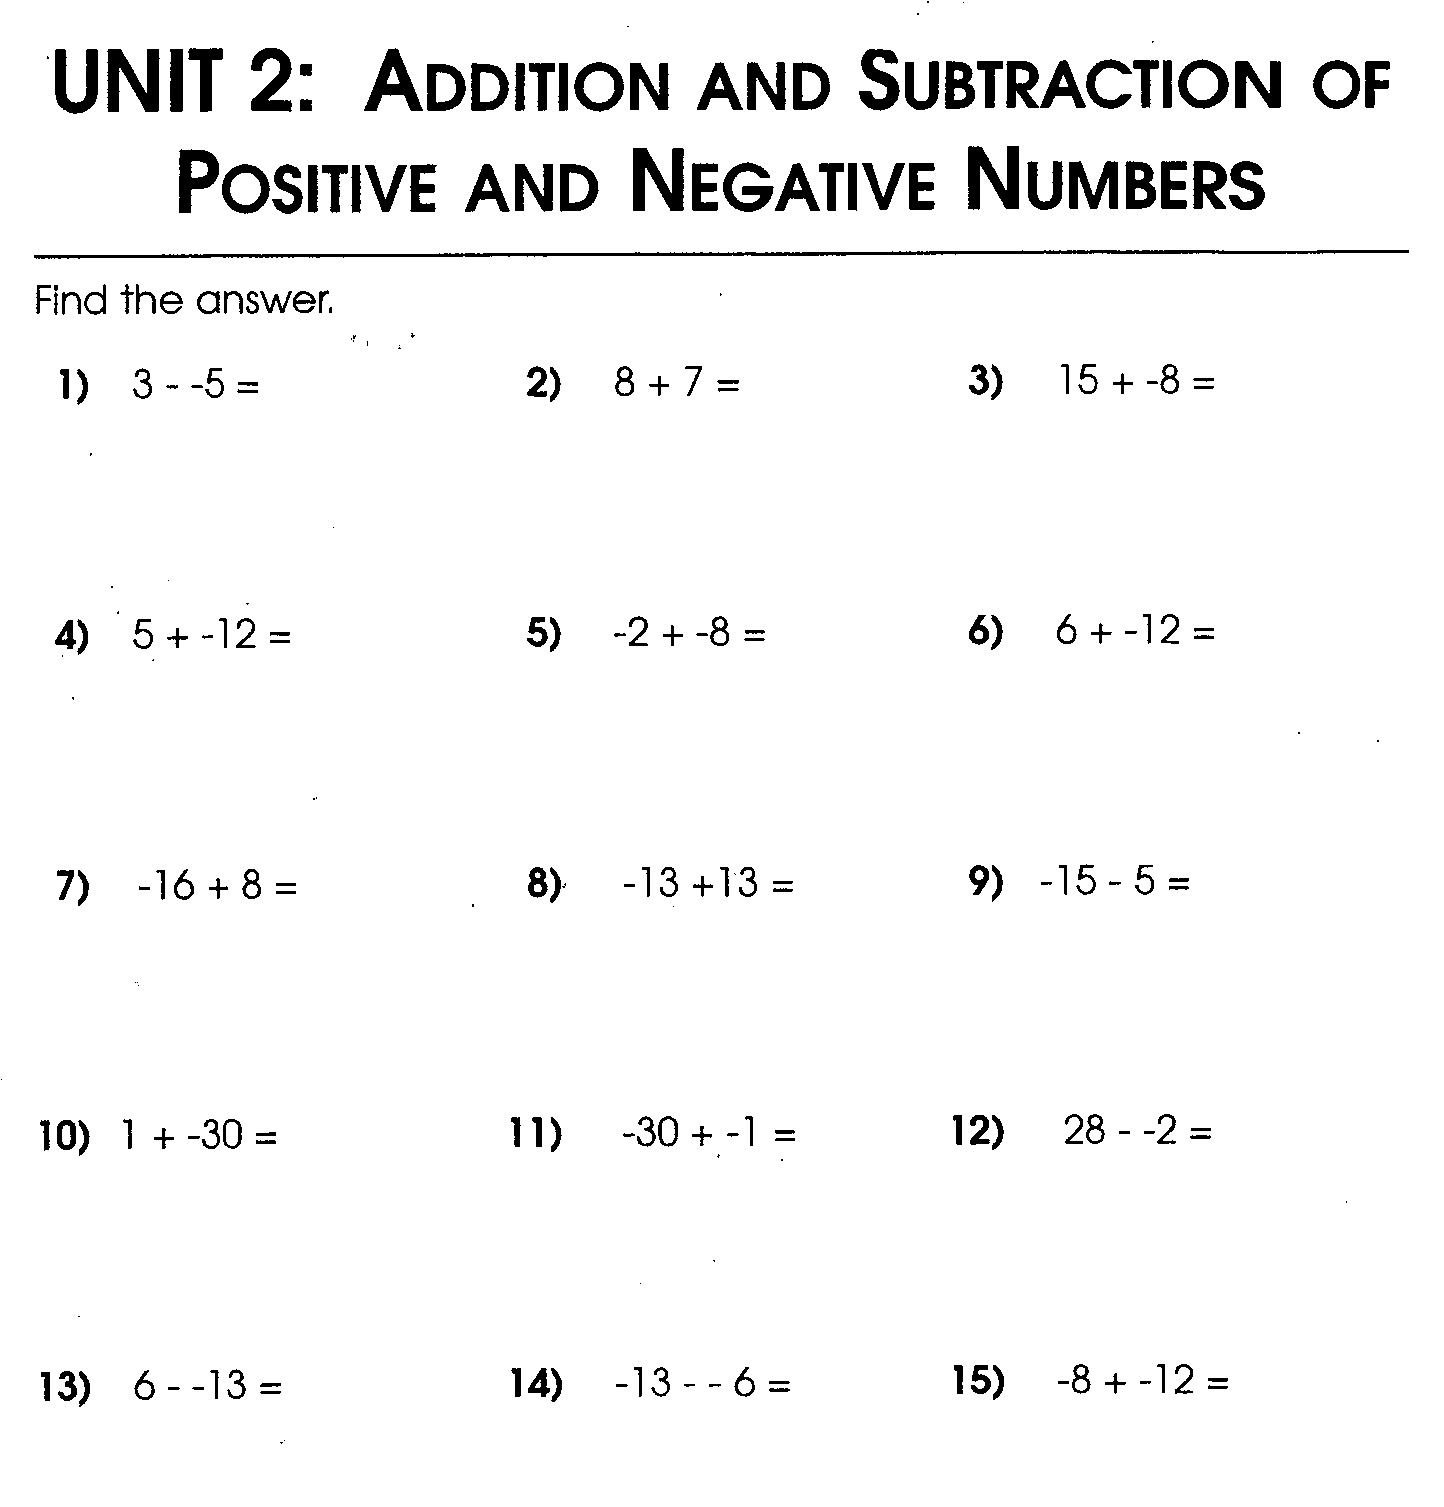 add-and-subtract-positive-and-negative-numbers-worksheets